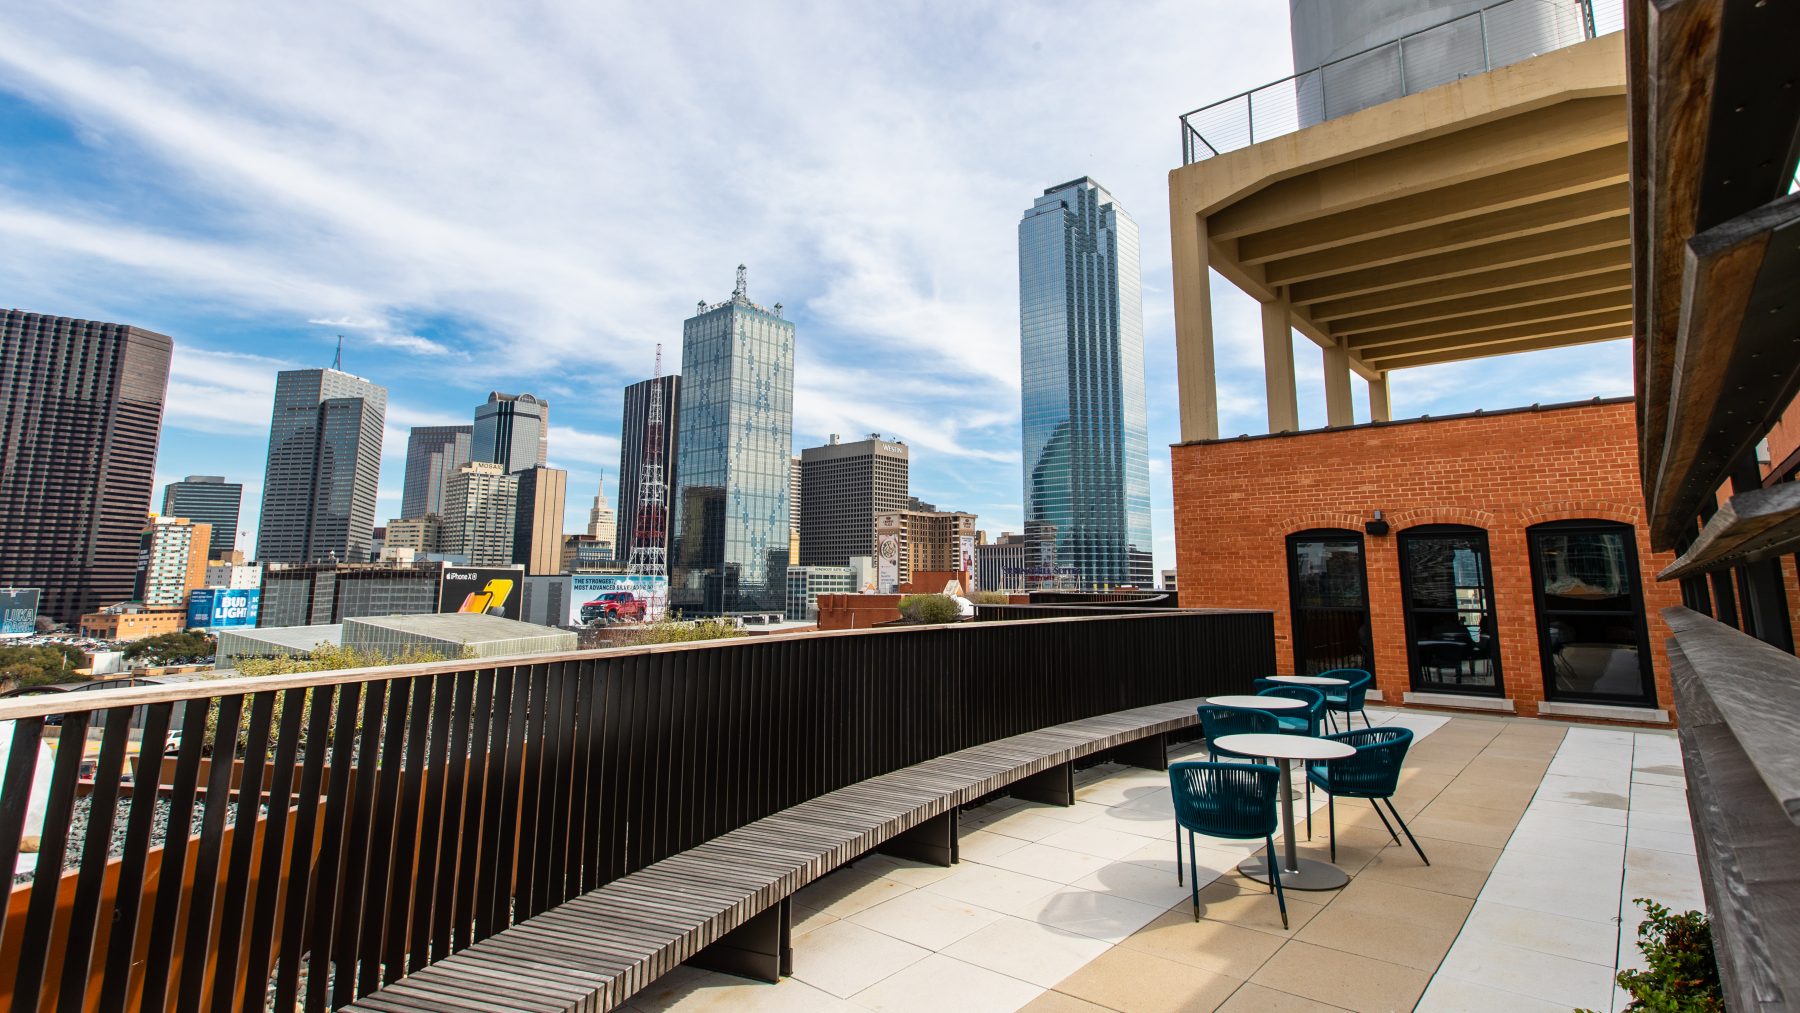 Rooftop patio for all members and tenants